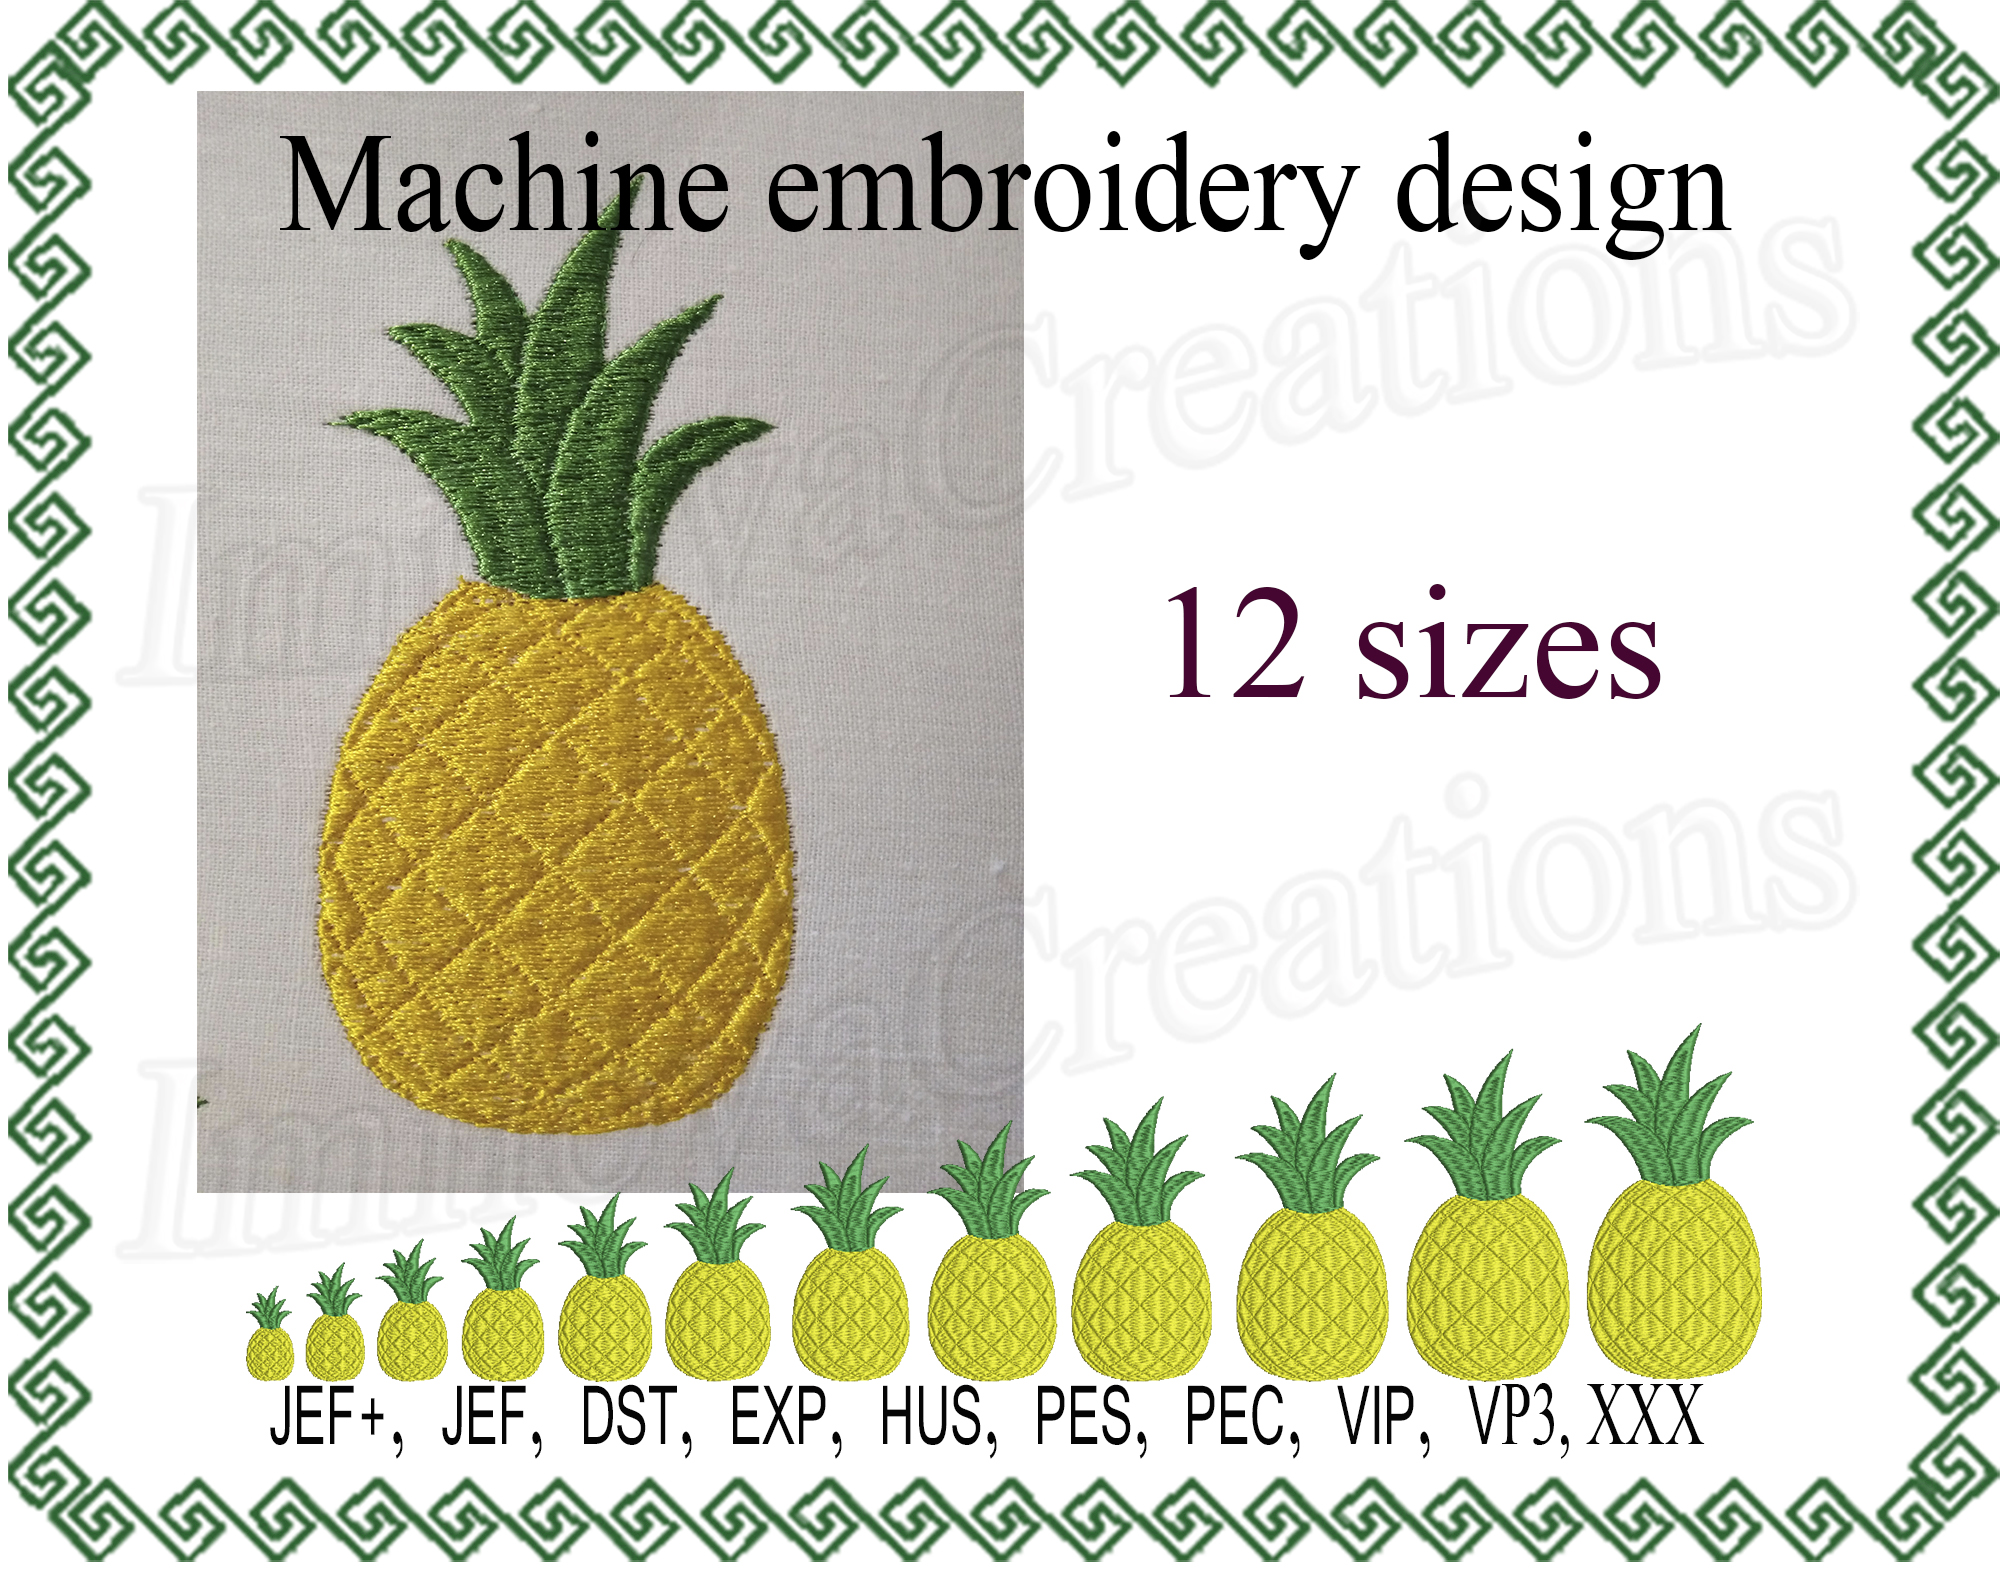 Design for embroidery machine Outline Pineapple Instant Download digital file stitch sign icon symbol pattern fruit tropical fresh 827e